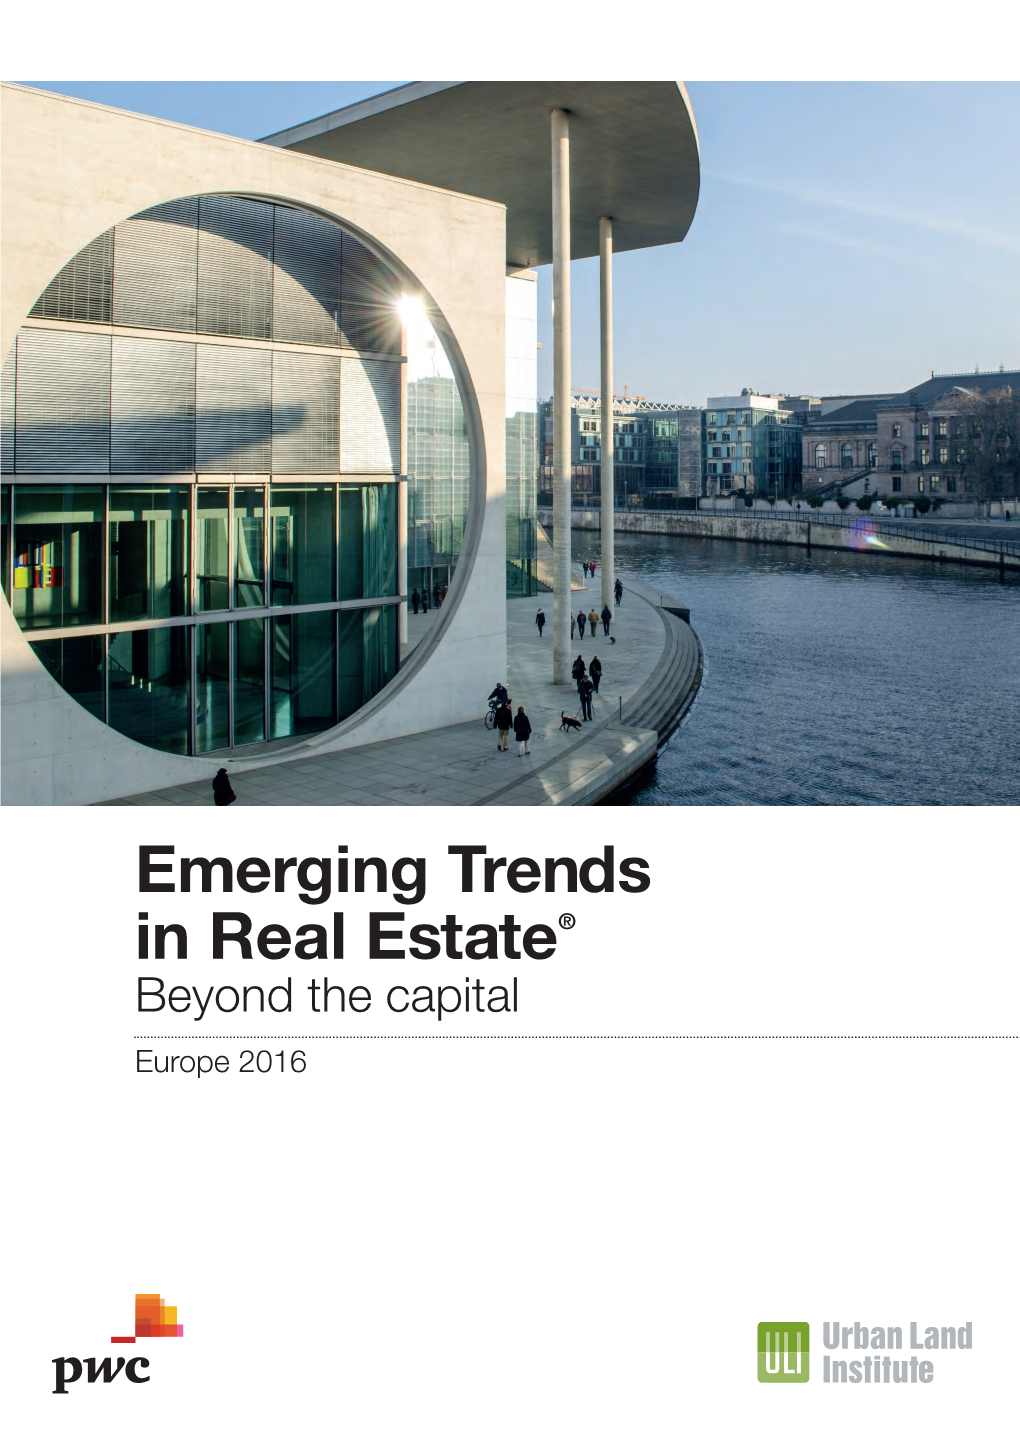 Emerging Trends in Real Estate Europe 2016